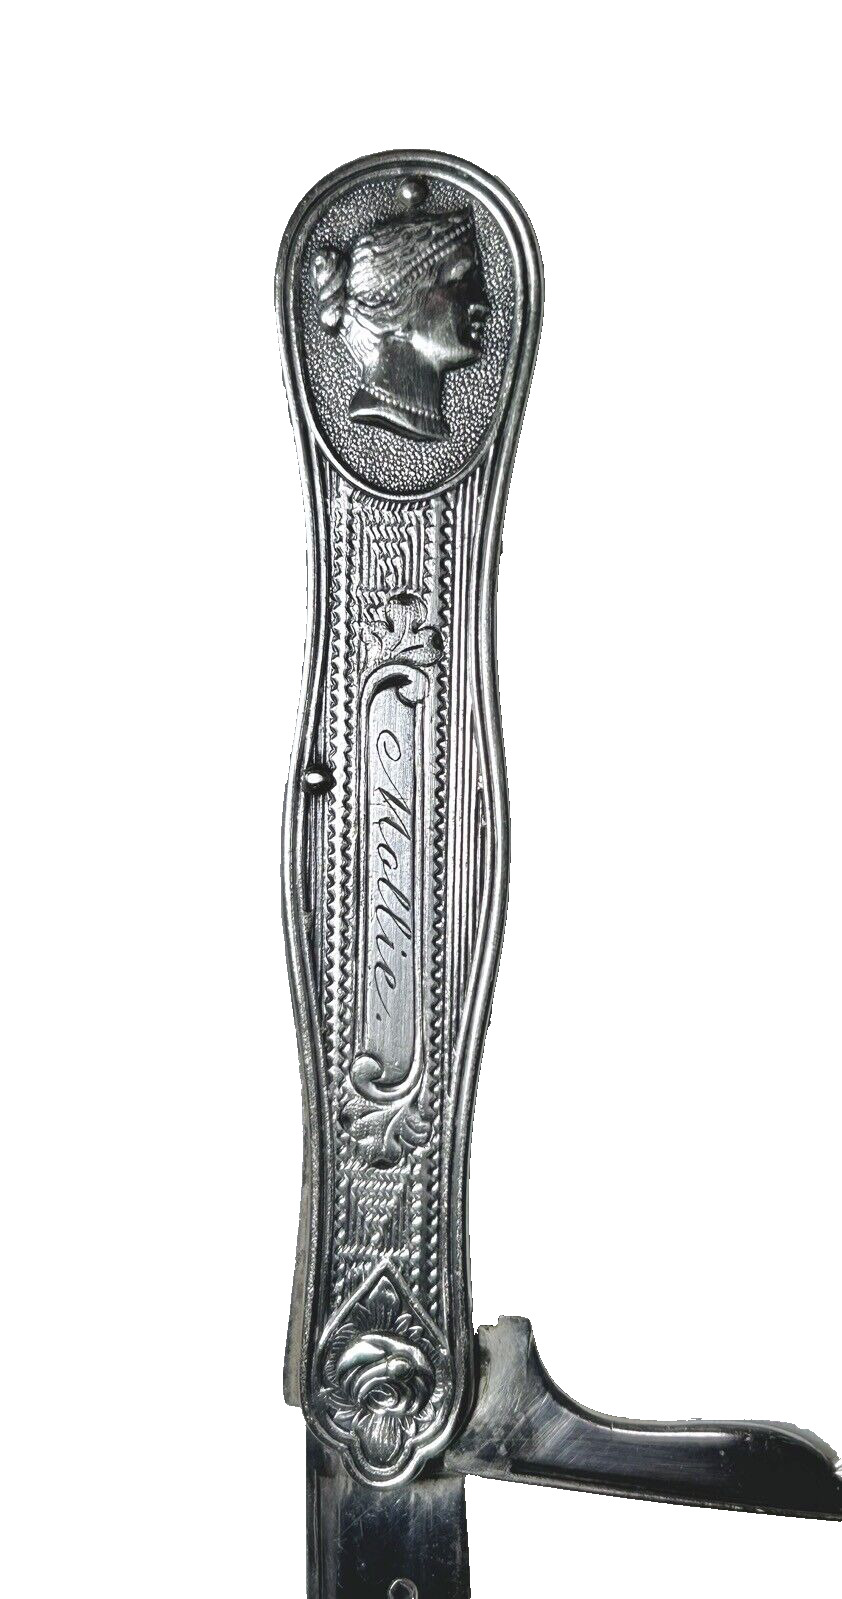 Antiqu Vict. 1870’s era Sterling Silver Fruit Pairing Folding Knife 3 1/4 Inches